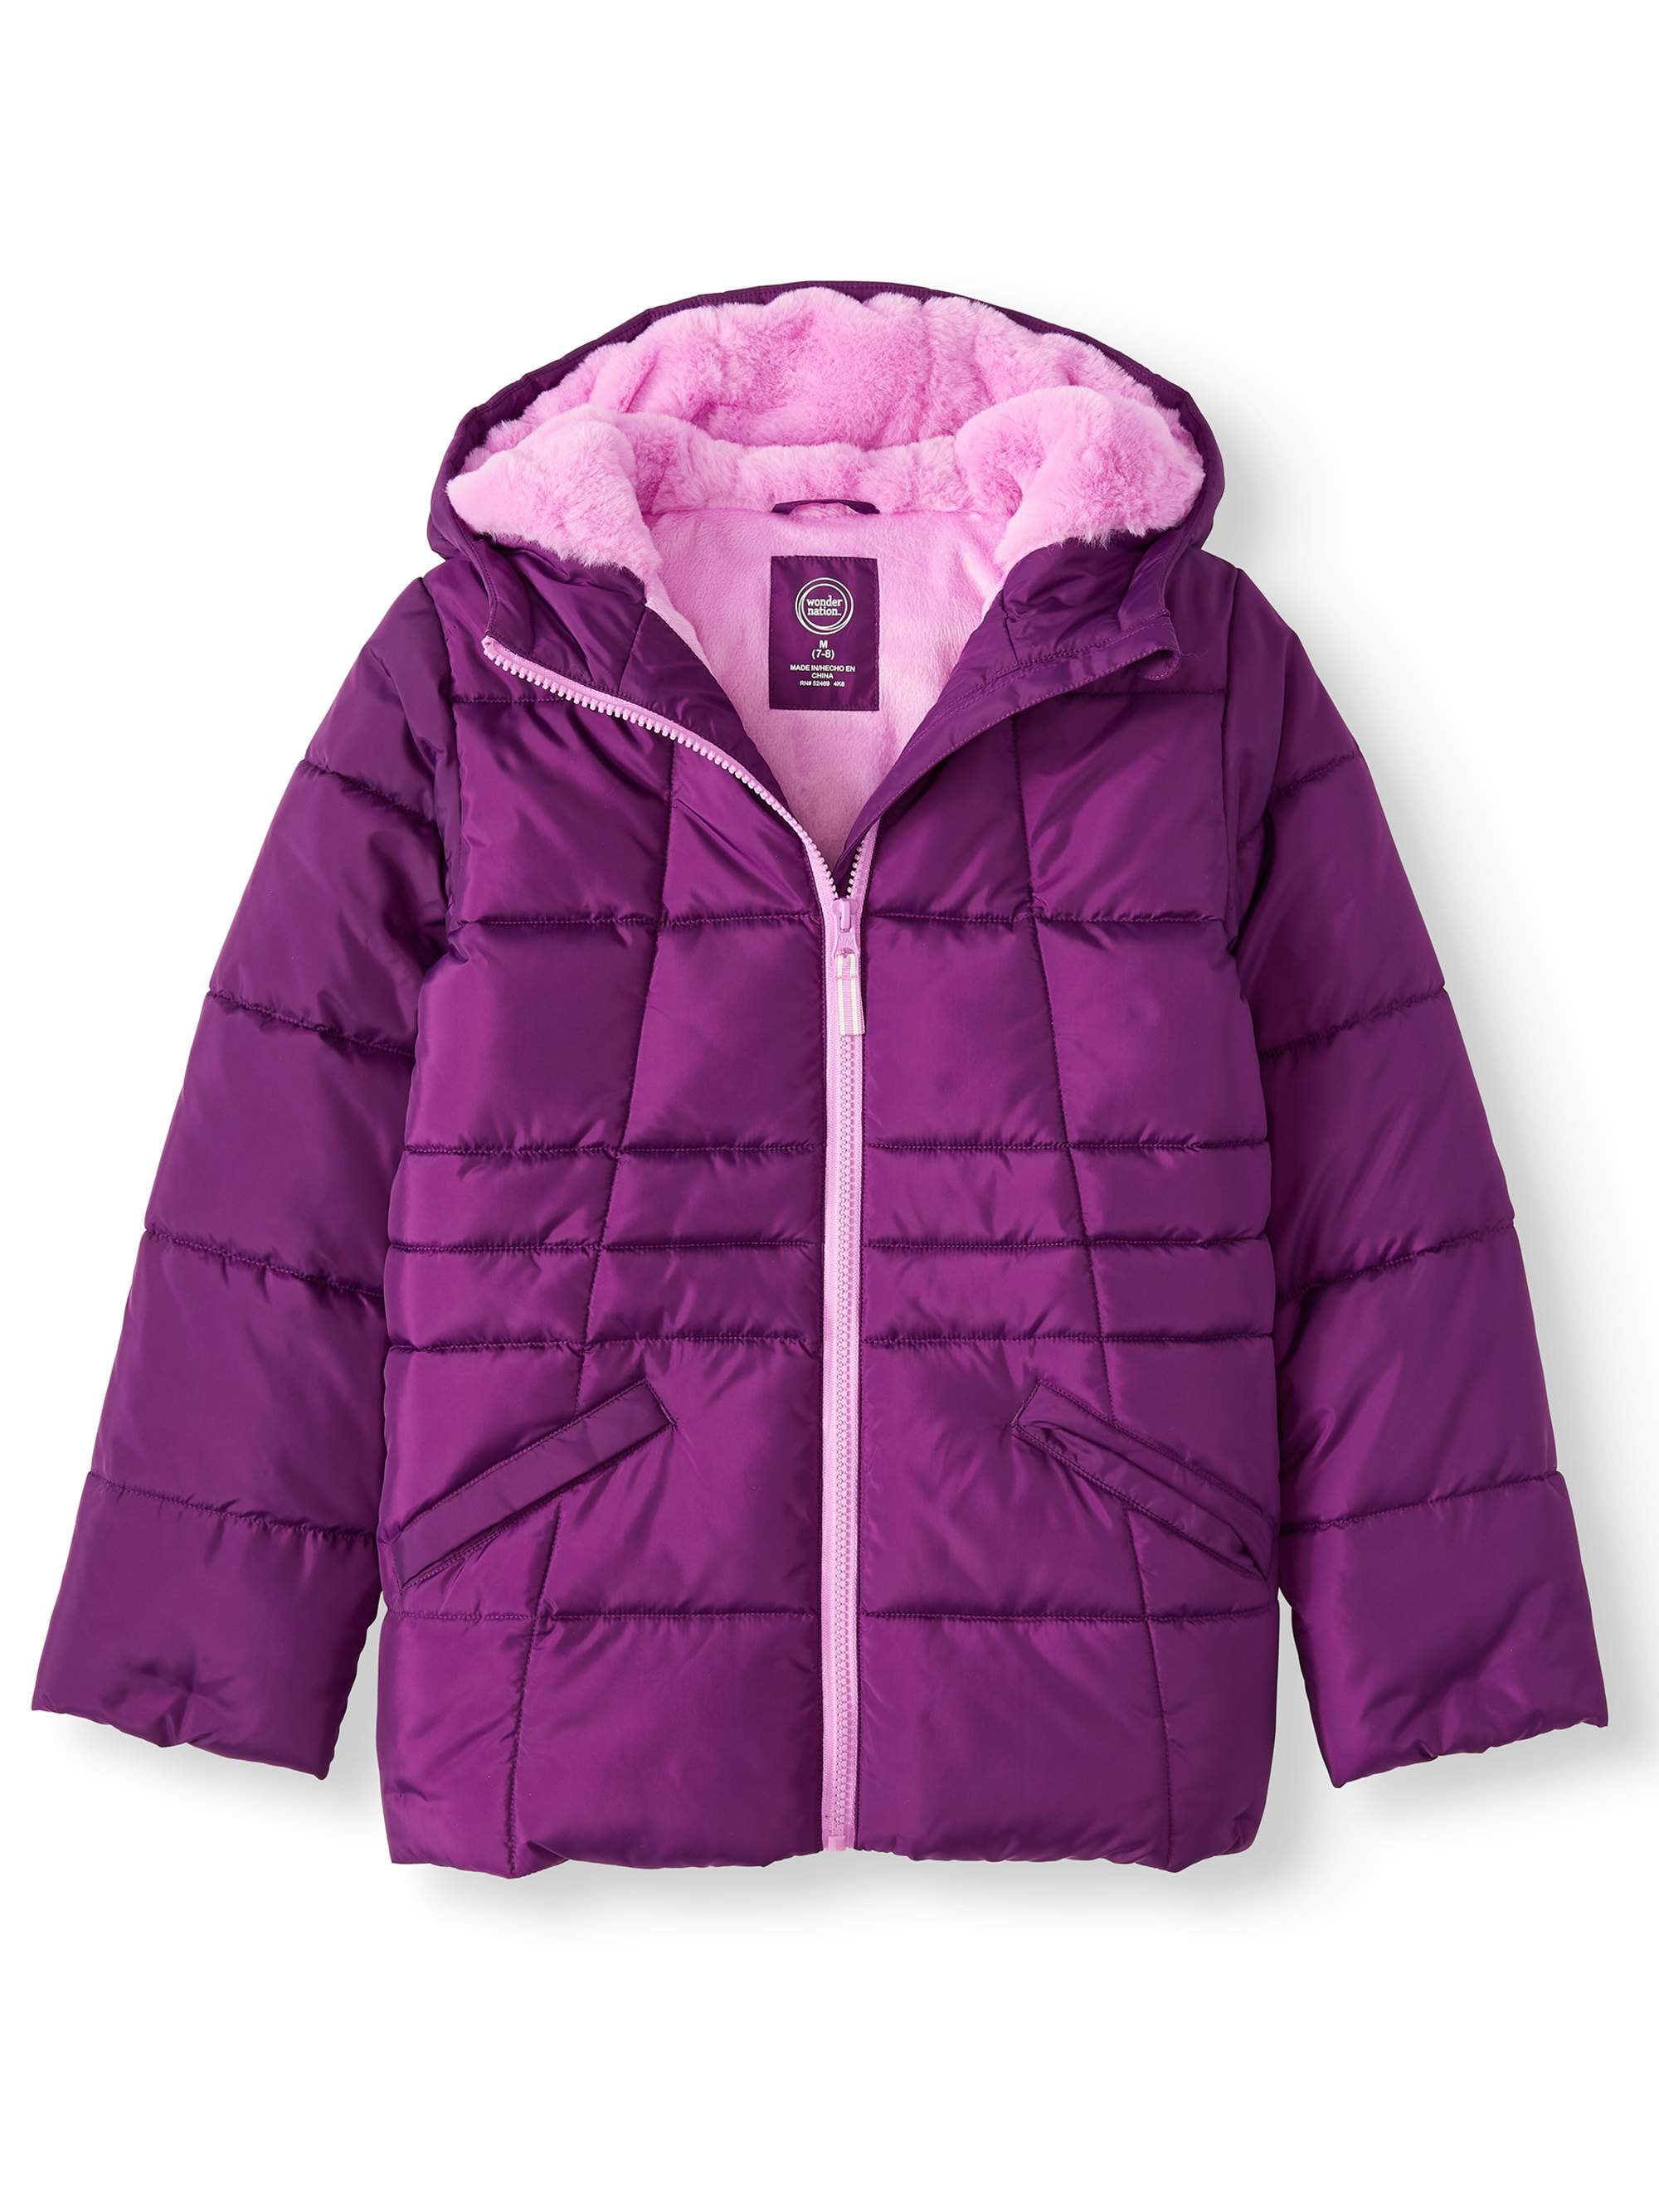 Little Girl Jackets And Coats | lupon.gov.ph